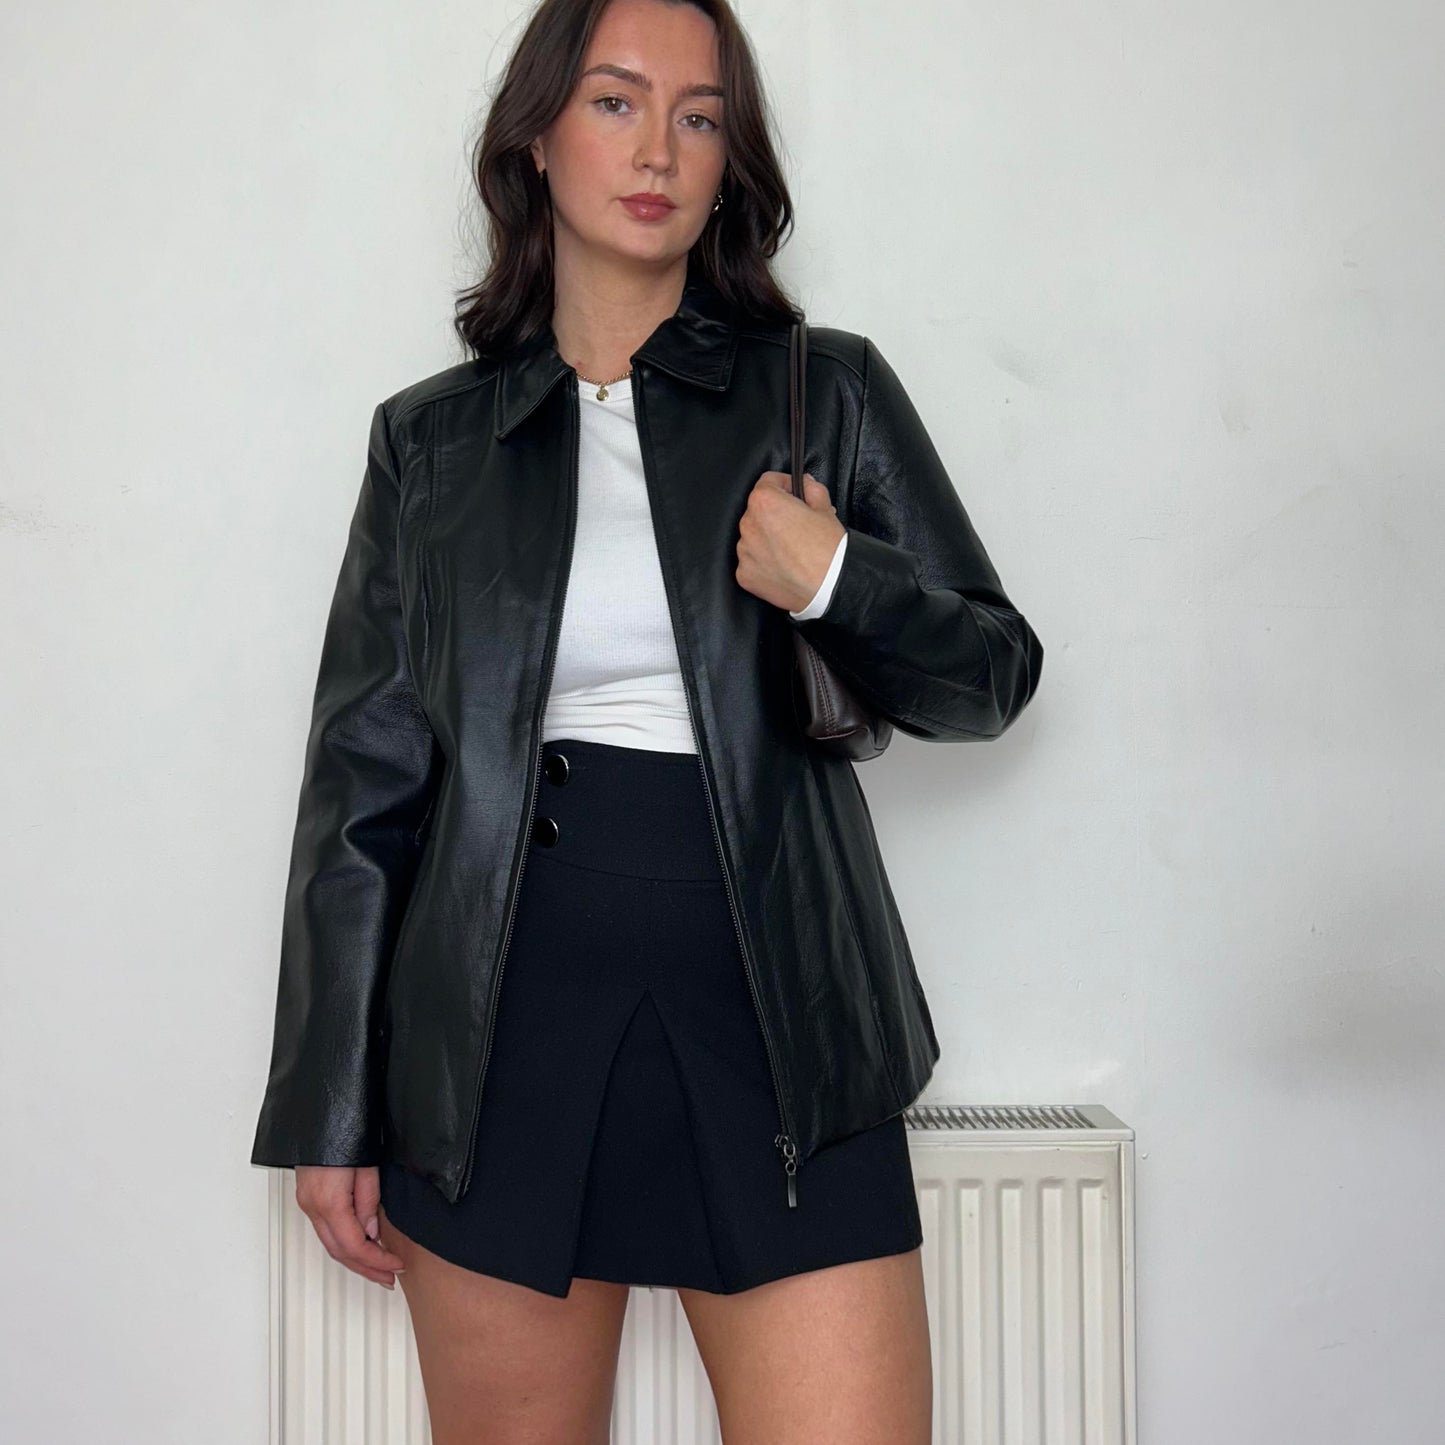 model wearing a black leather bomber jacket with a white top and black skirt with a brown  bag